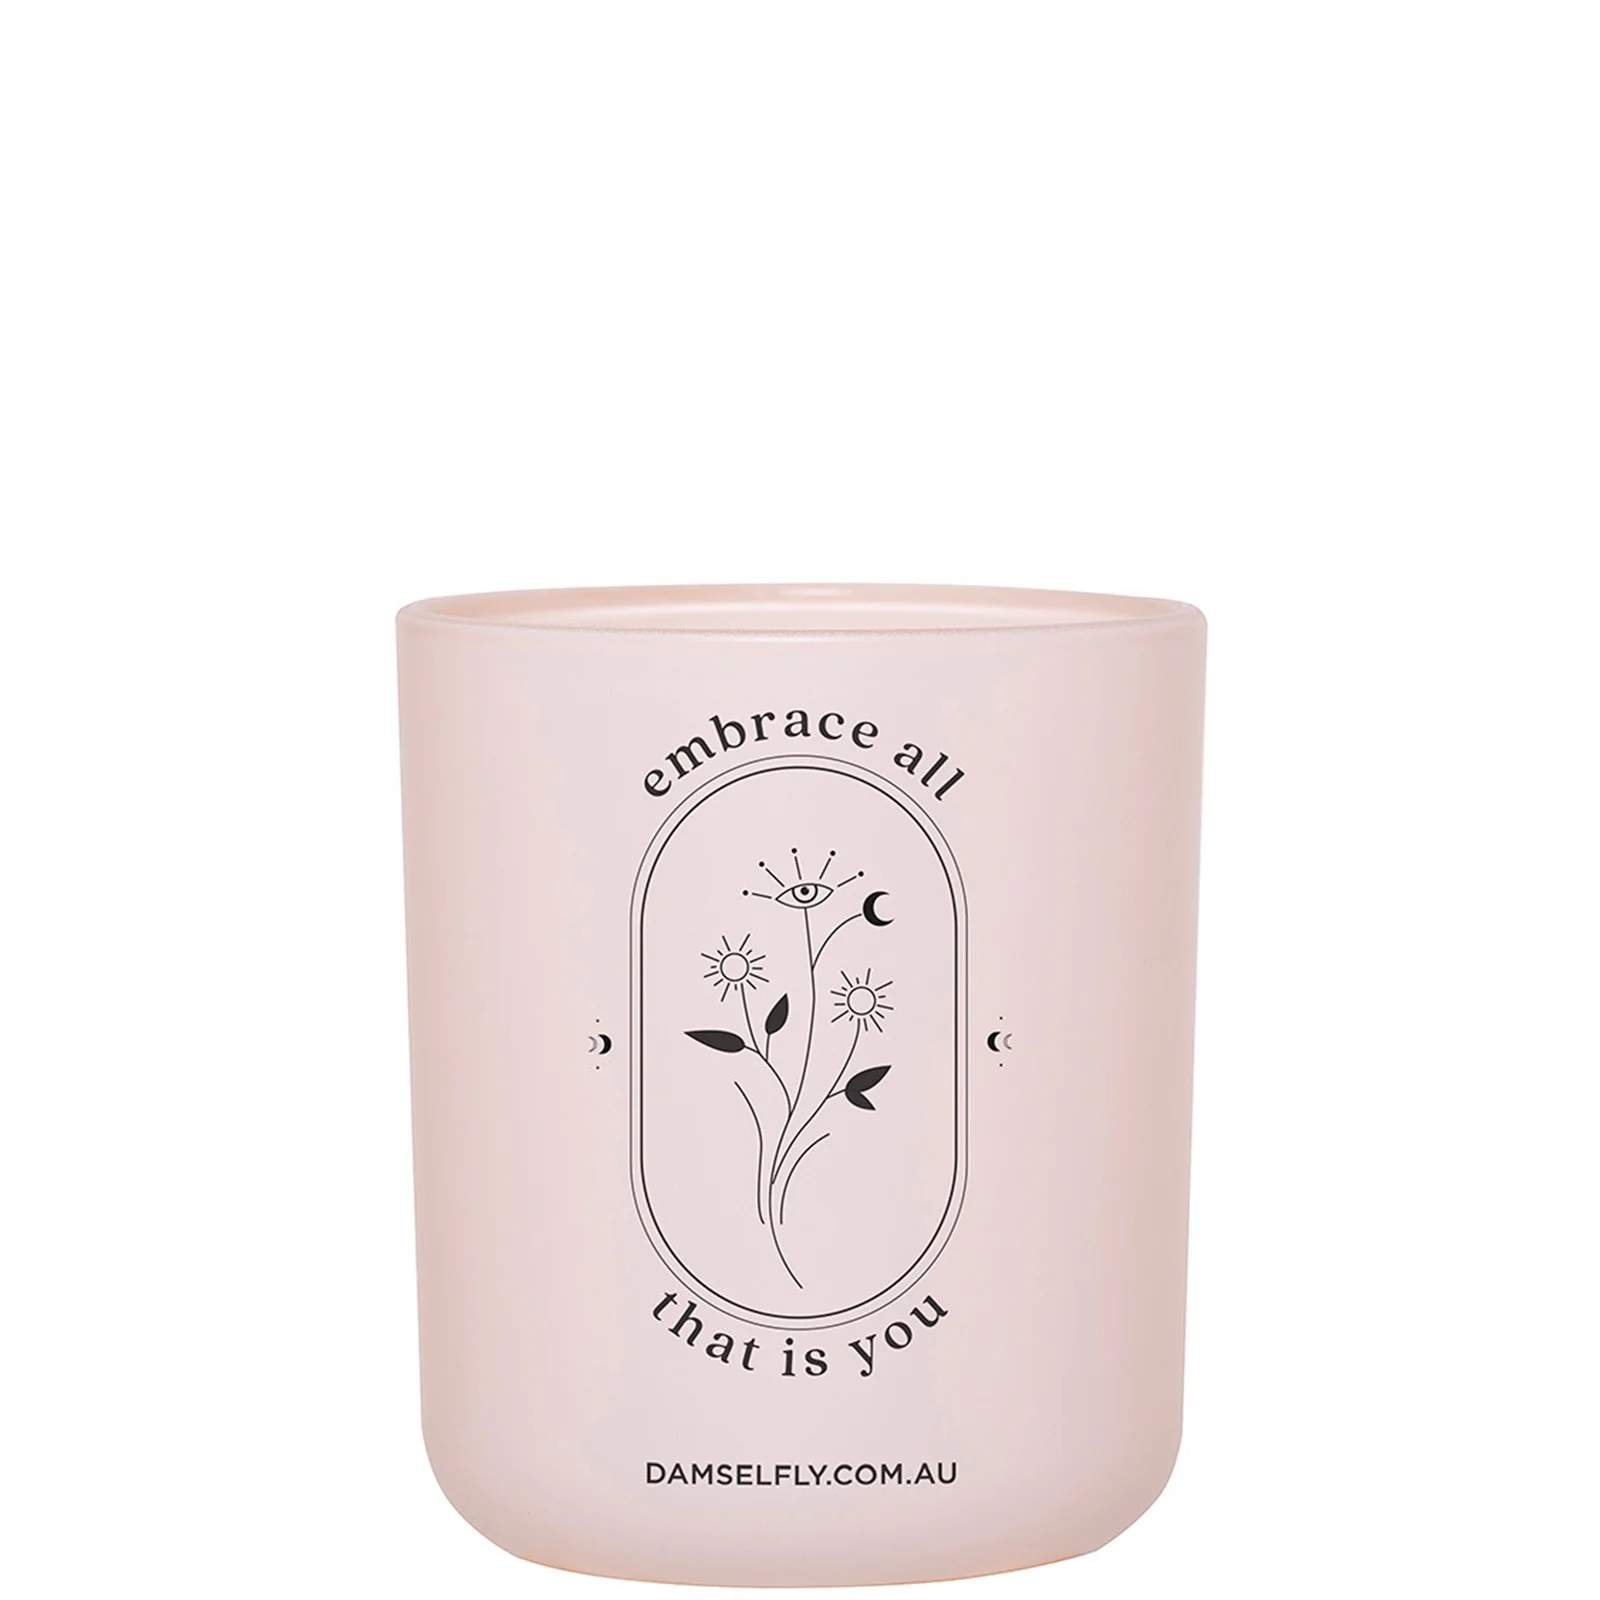 Damselfly Embrace Scented Candle - 300g Image 1